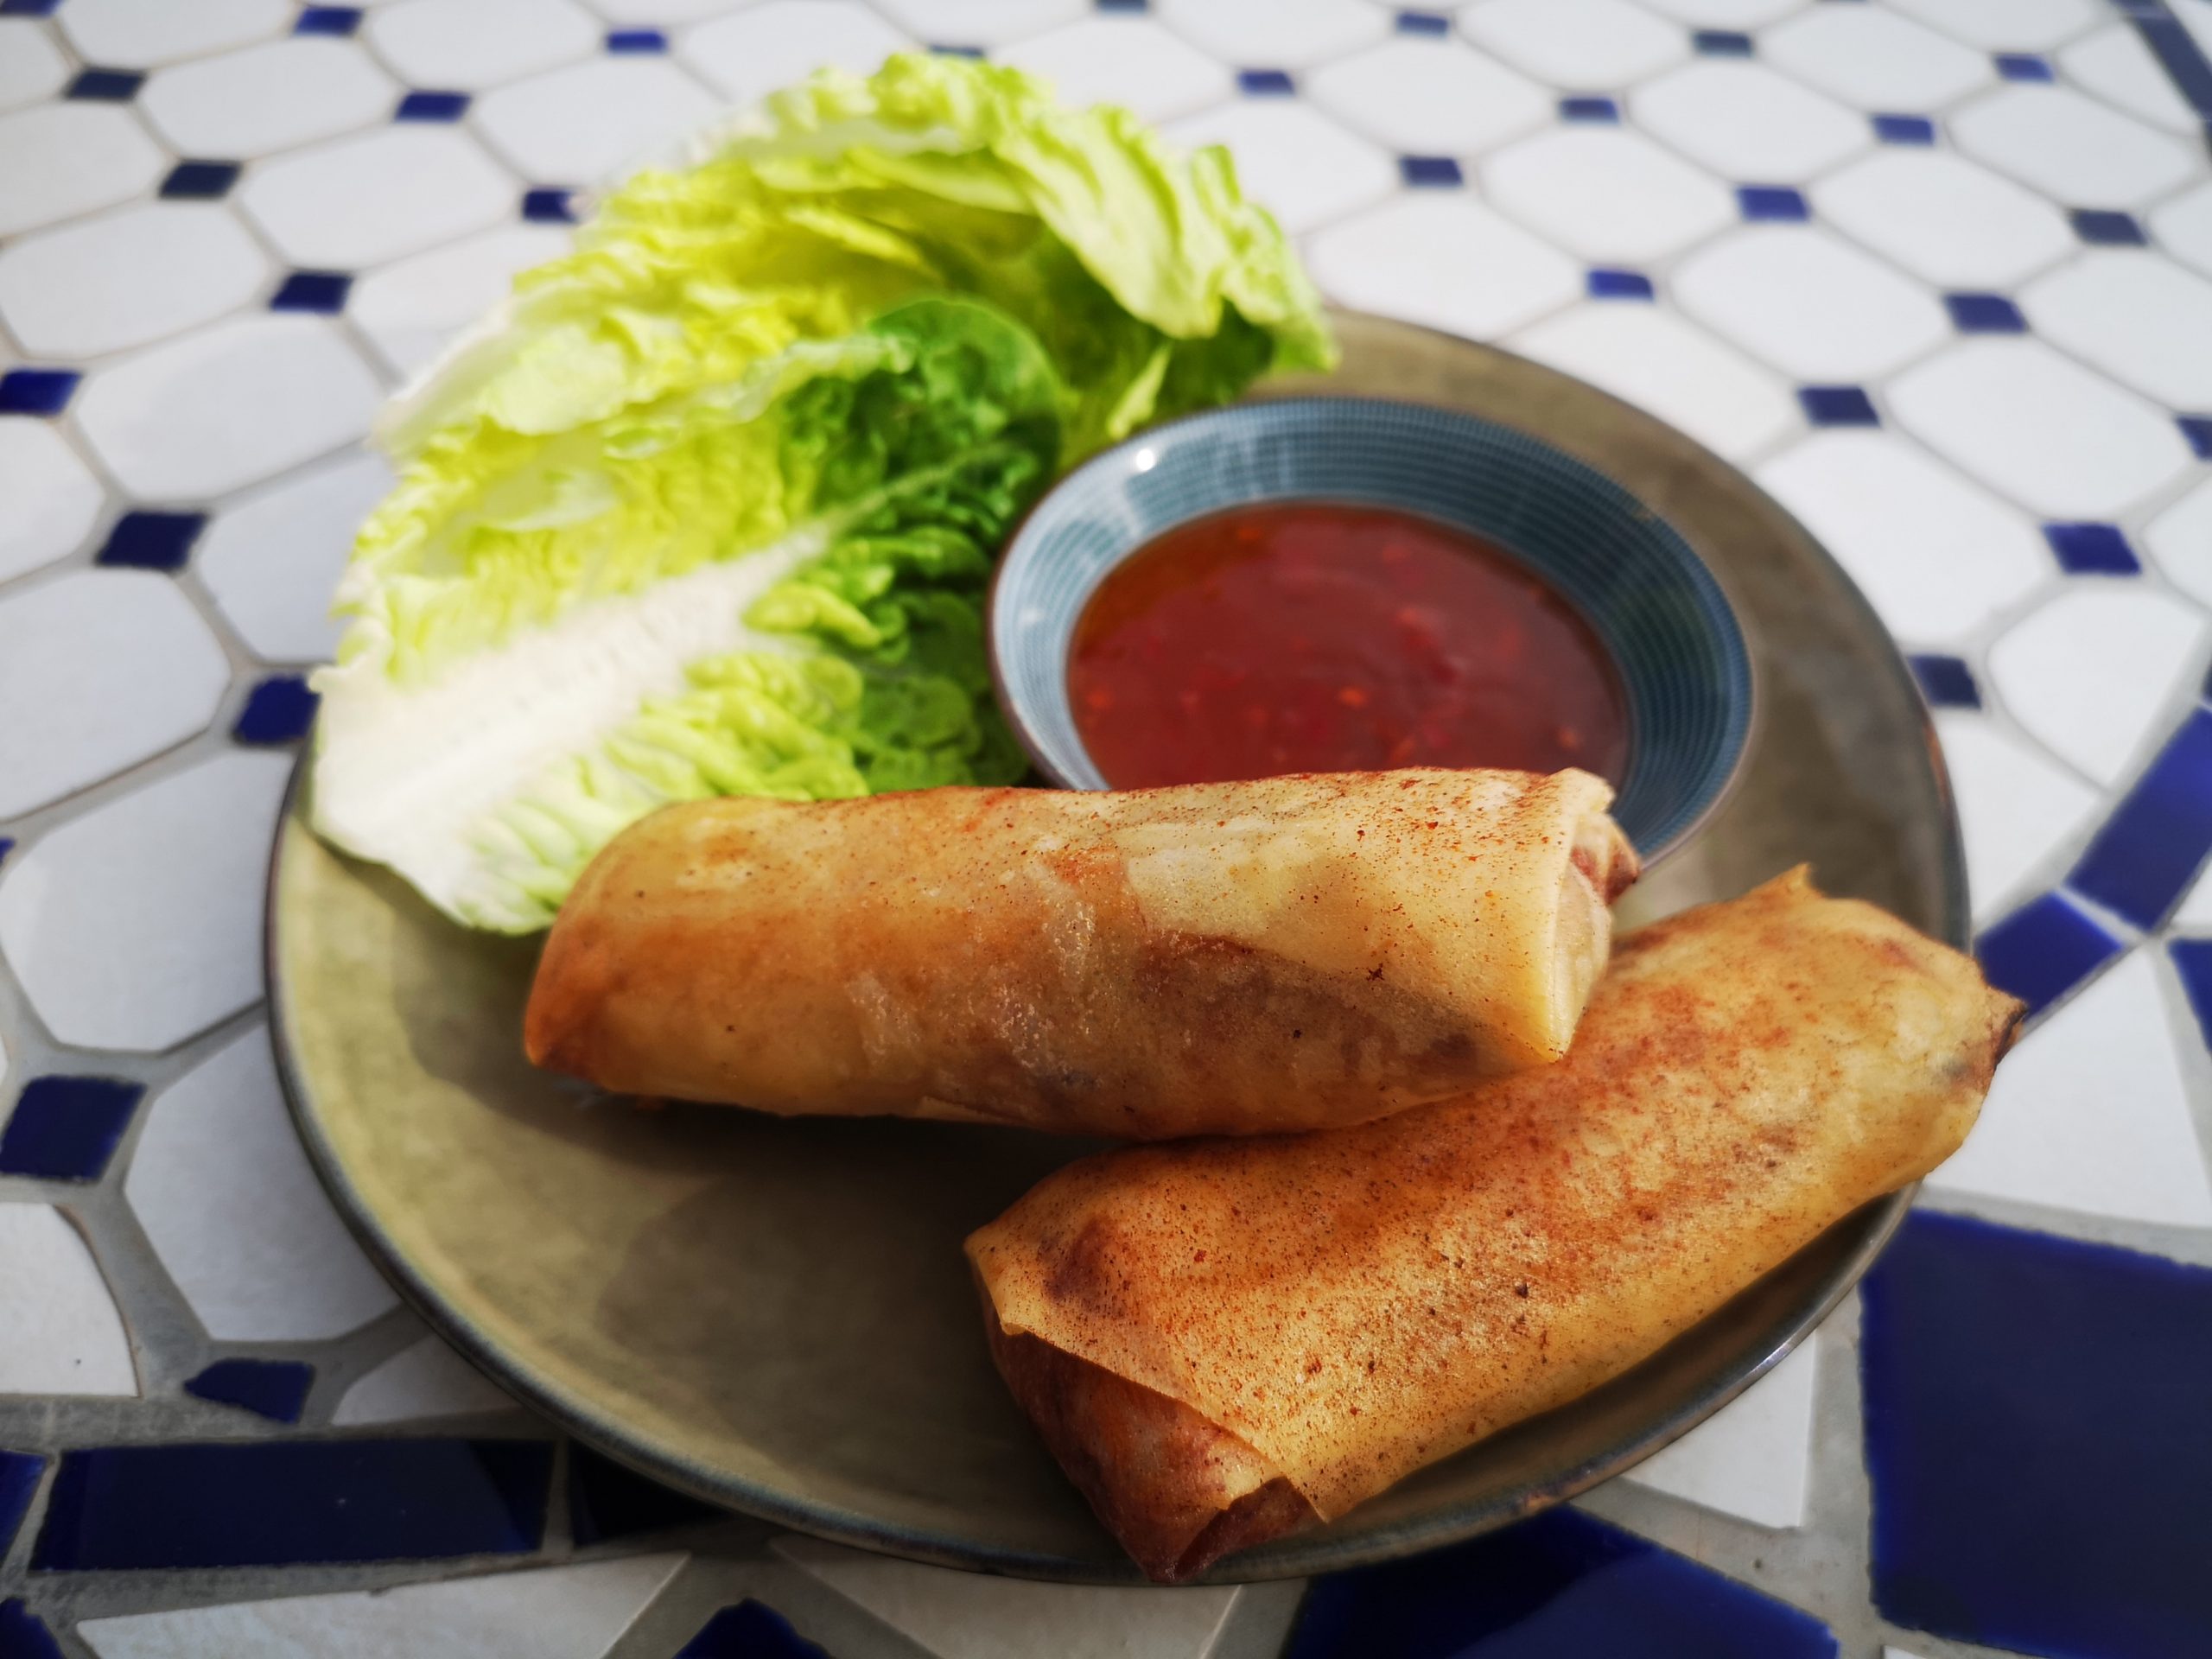 Spring Home TYJ Spring Roll Pastry 8 (25 Sheets) - 12 oz (340 g) - Well  Come Asian Market